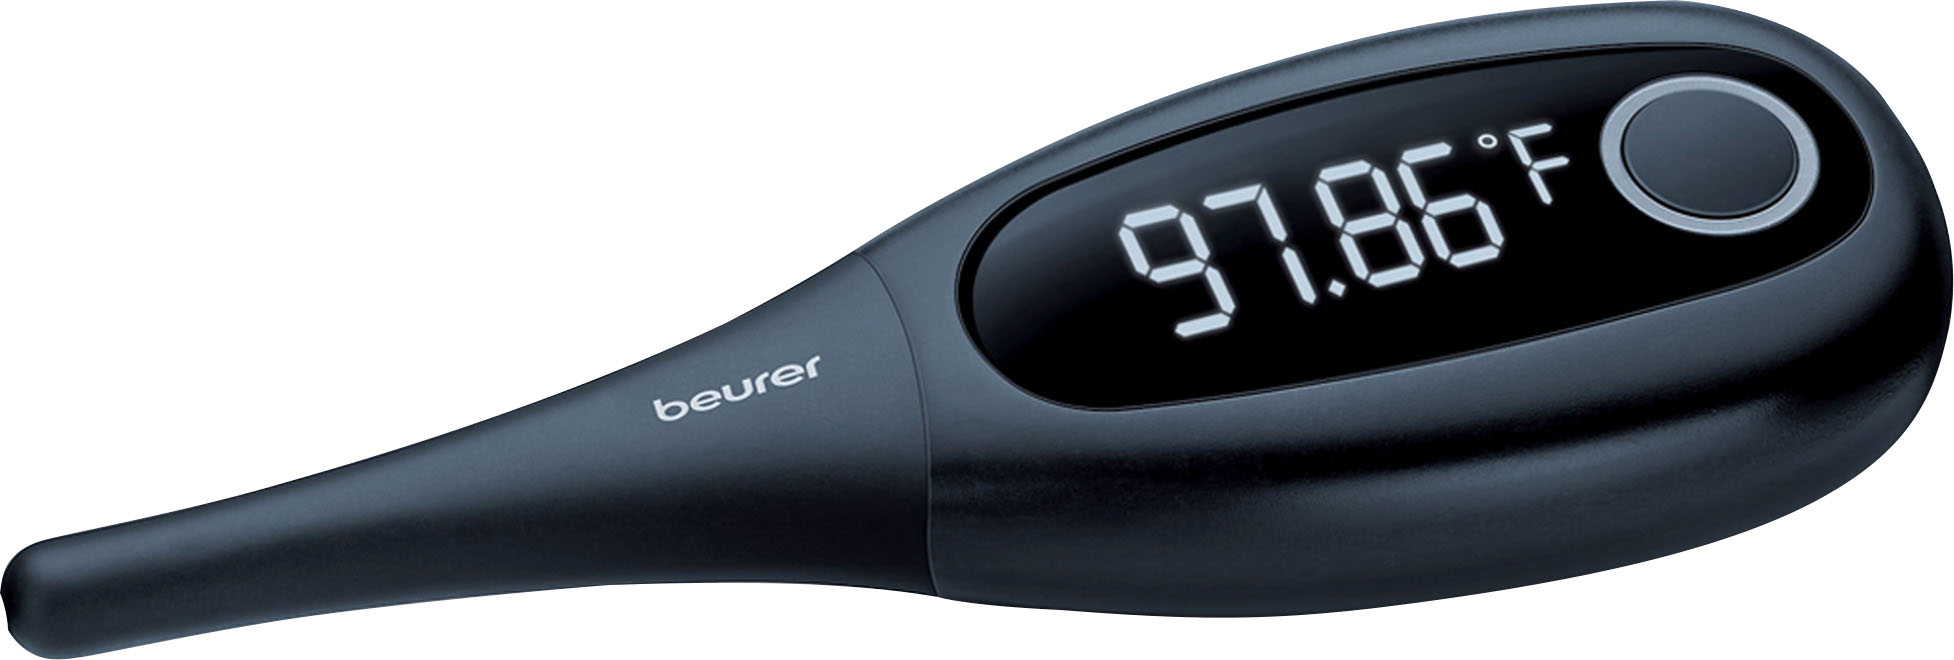 Beurer Ovulation Tracking Basal Body Thermometer, OT30